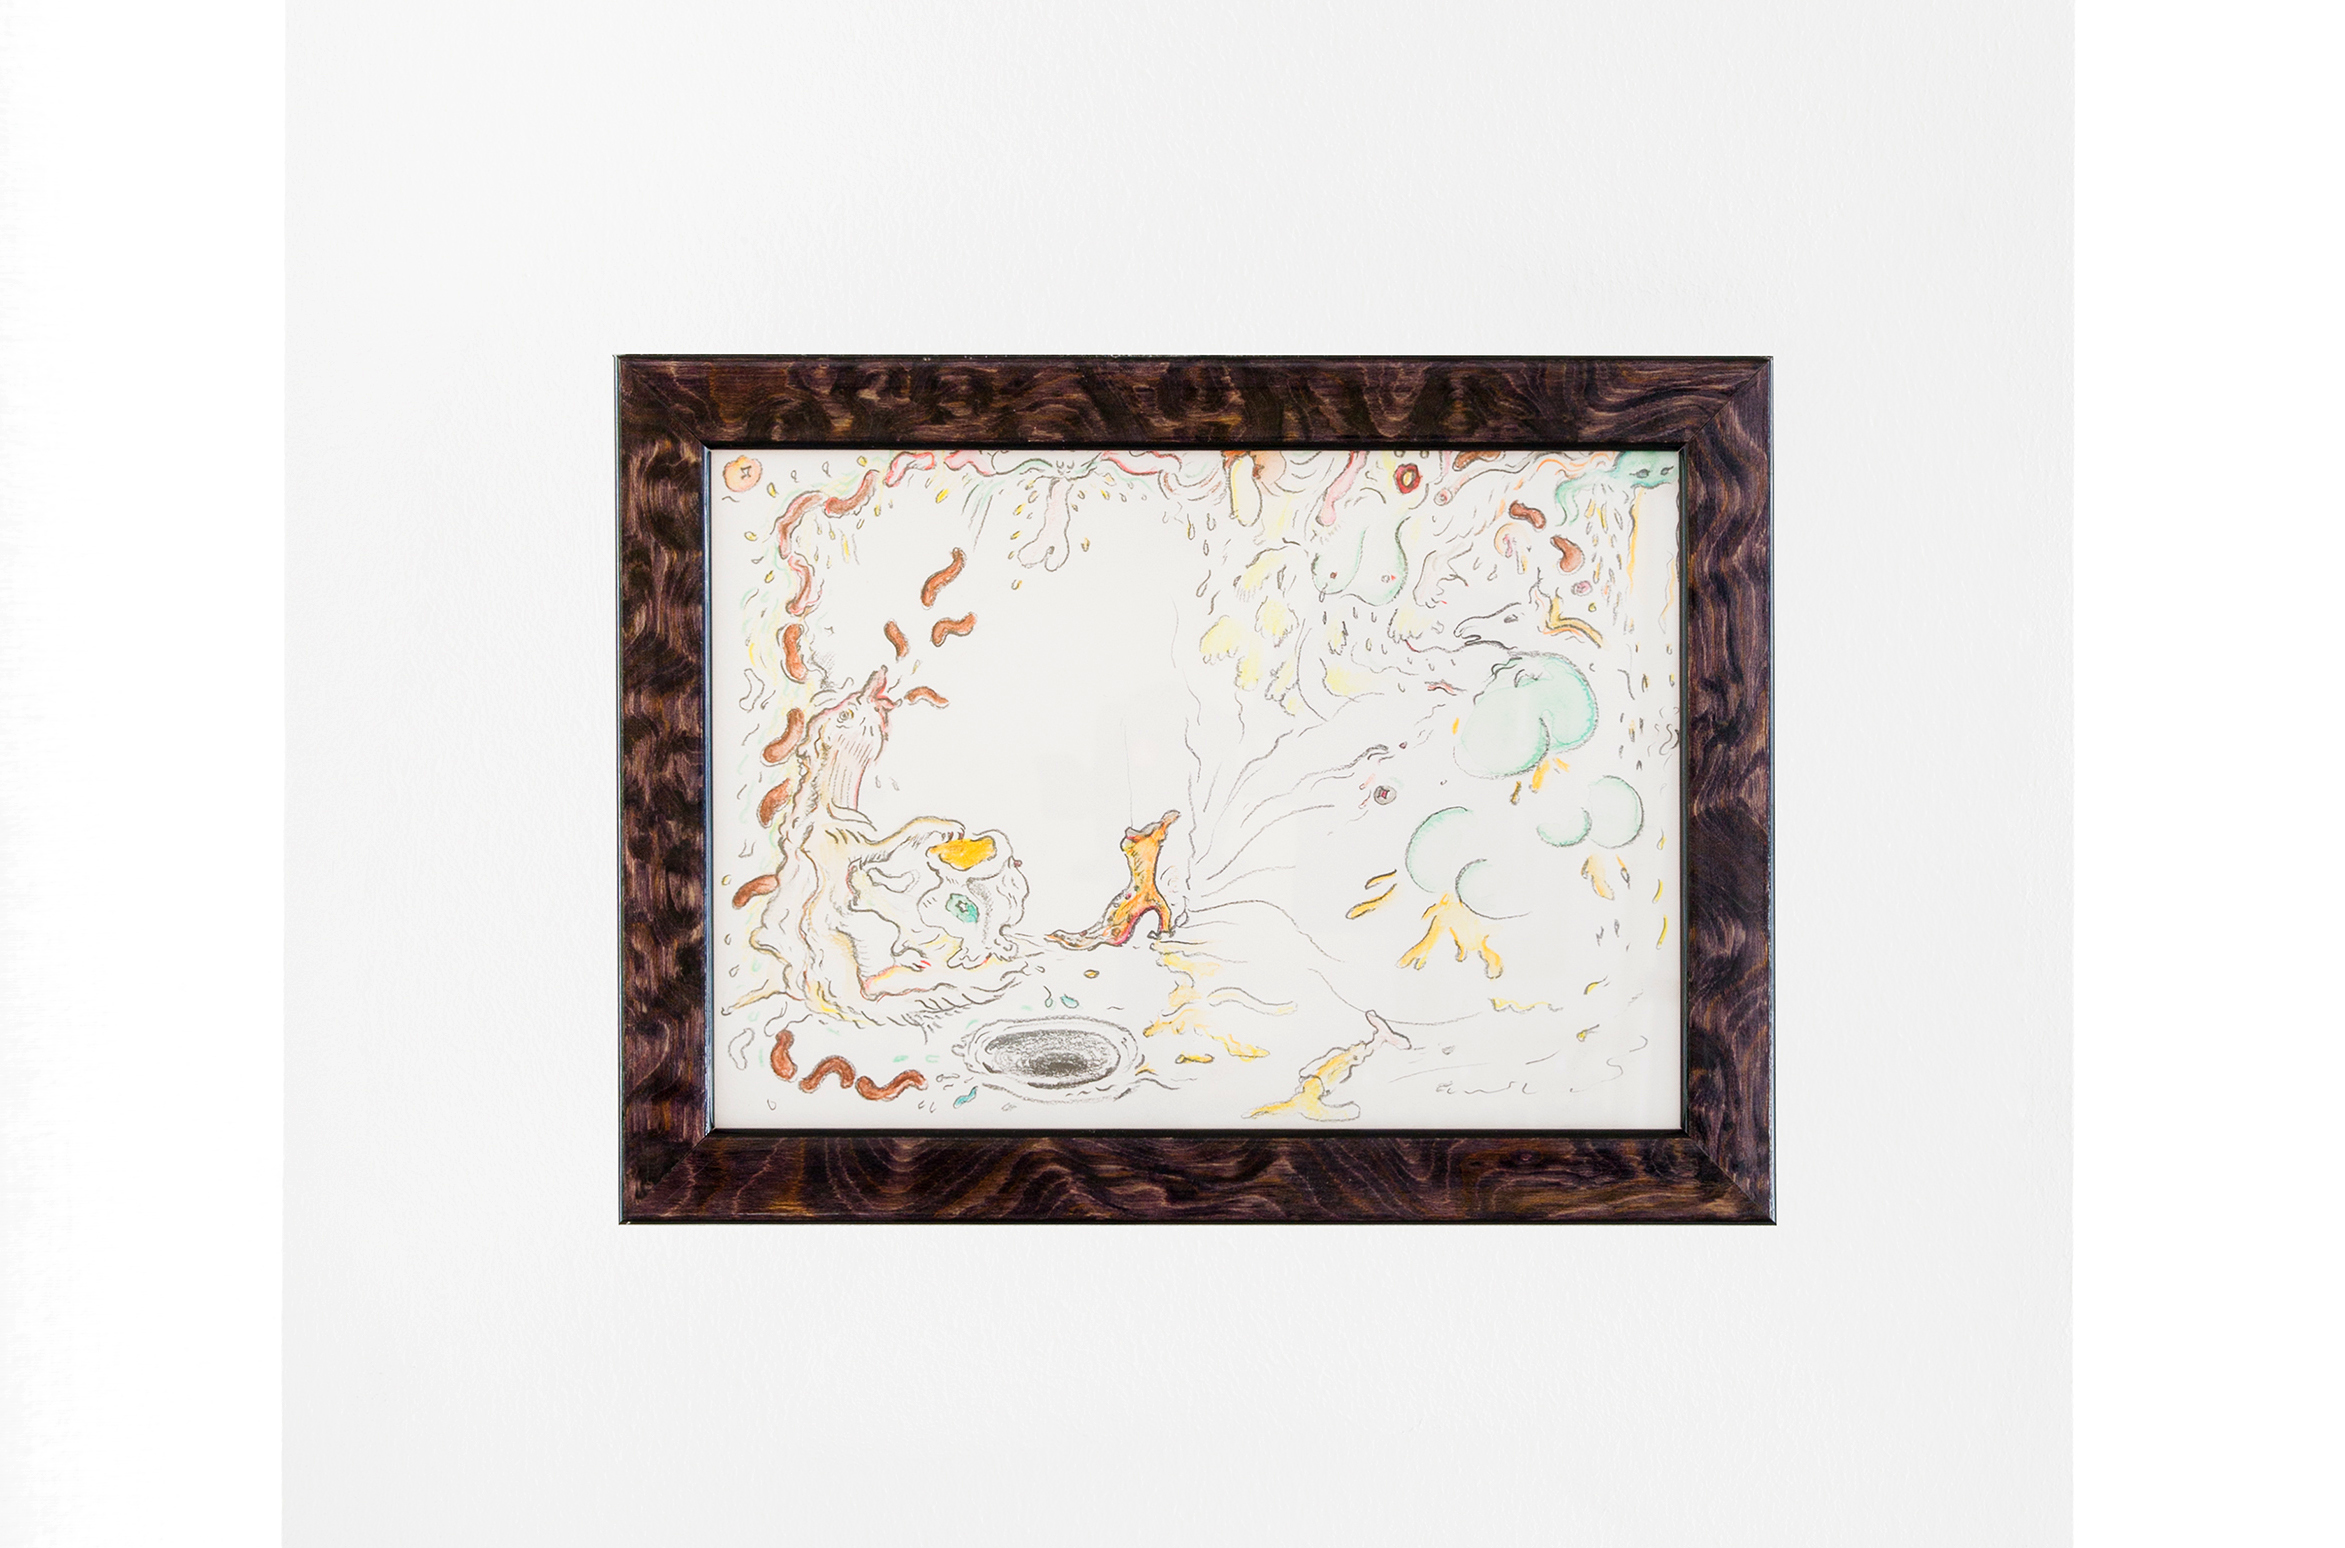 Wet Resistance, Dortmunder Kunstverein, 2022 Zoe Williams, Gate Keeper with Piss Pot and Black Hole, 2018 pencil and watercolours crayon on paper, in artistâ€™s tinted walnut burr frame Photo: Jens Franke  Courtesy: the artist, Ciaccia Levy Paris-Milan